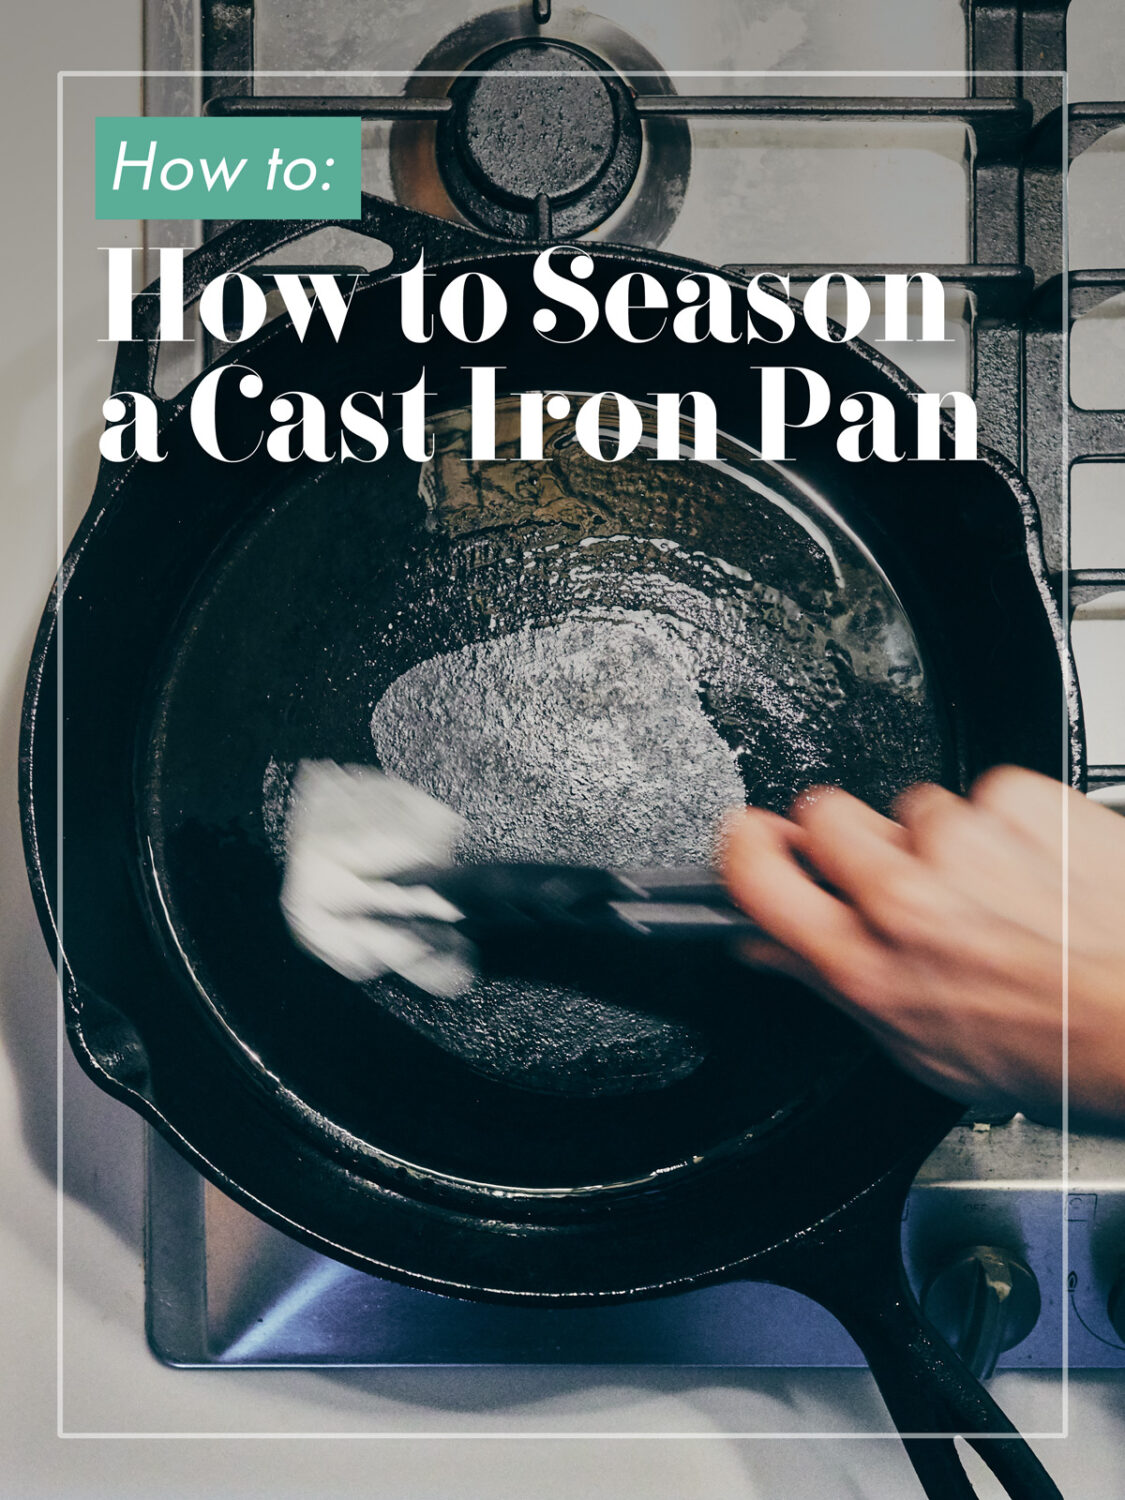 How to Season or Cure Cast Iron Fry Pans